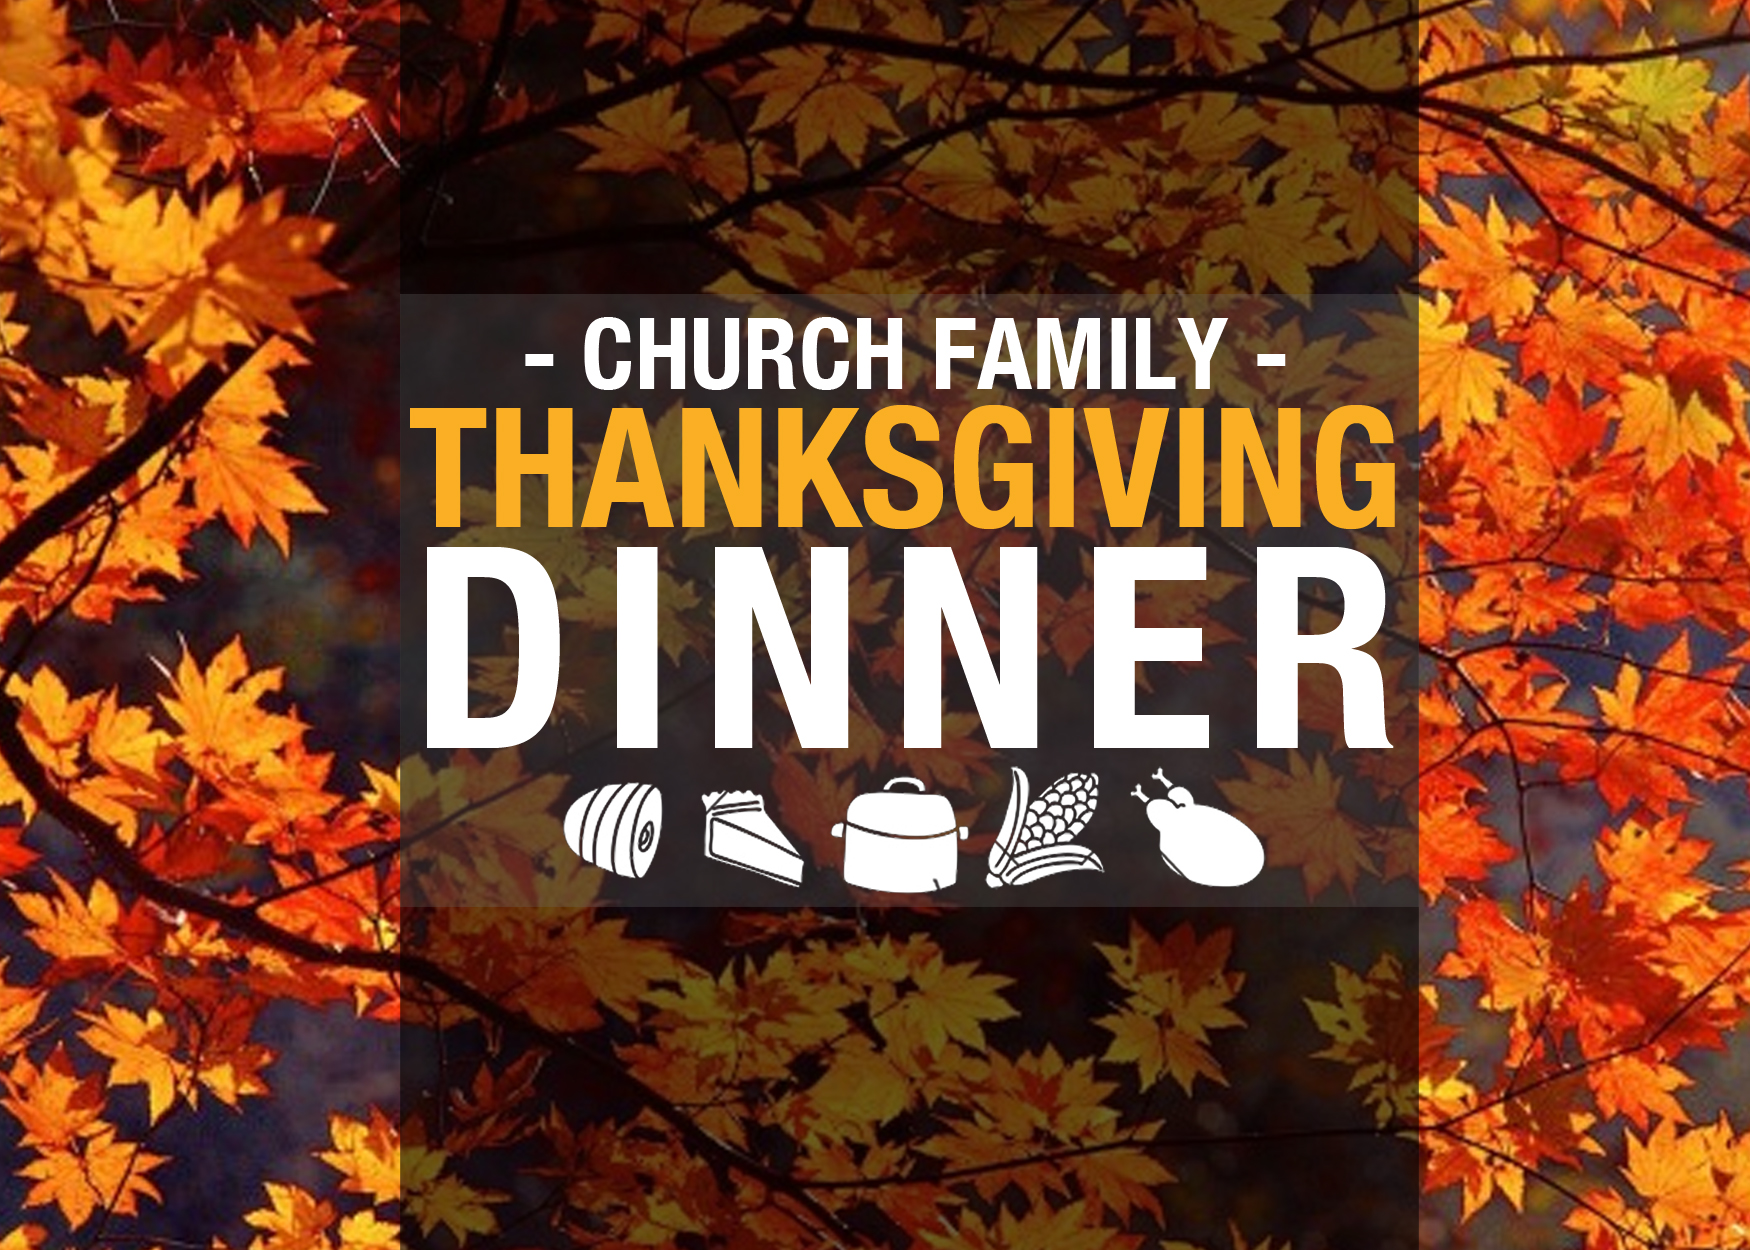 Join Us For A Traditional Thanksgiving Dinner   Fellowship On Sunday